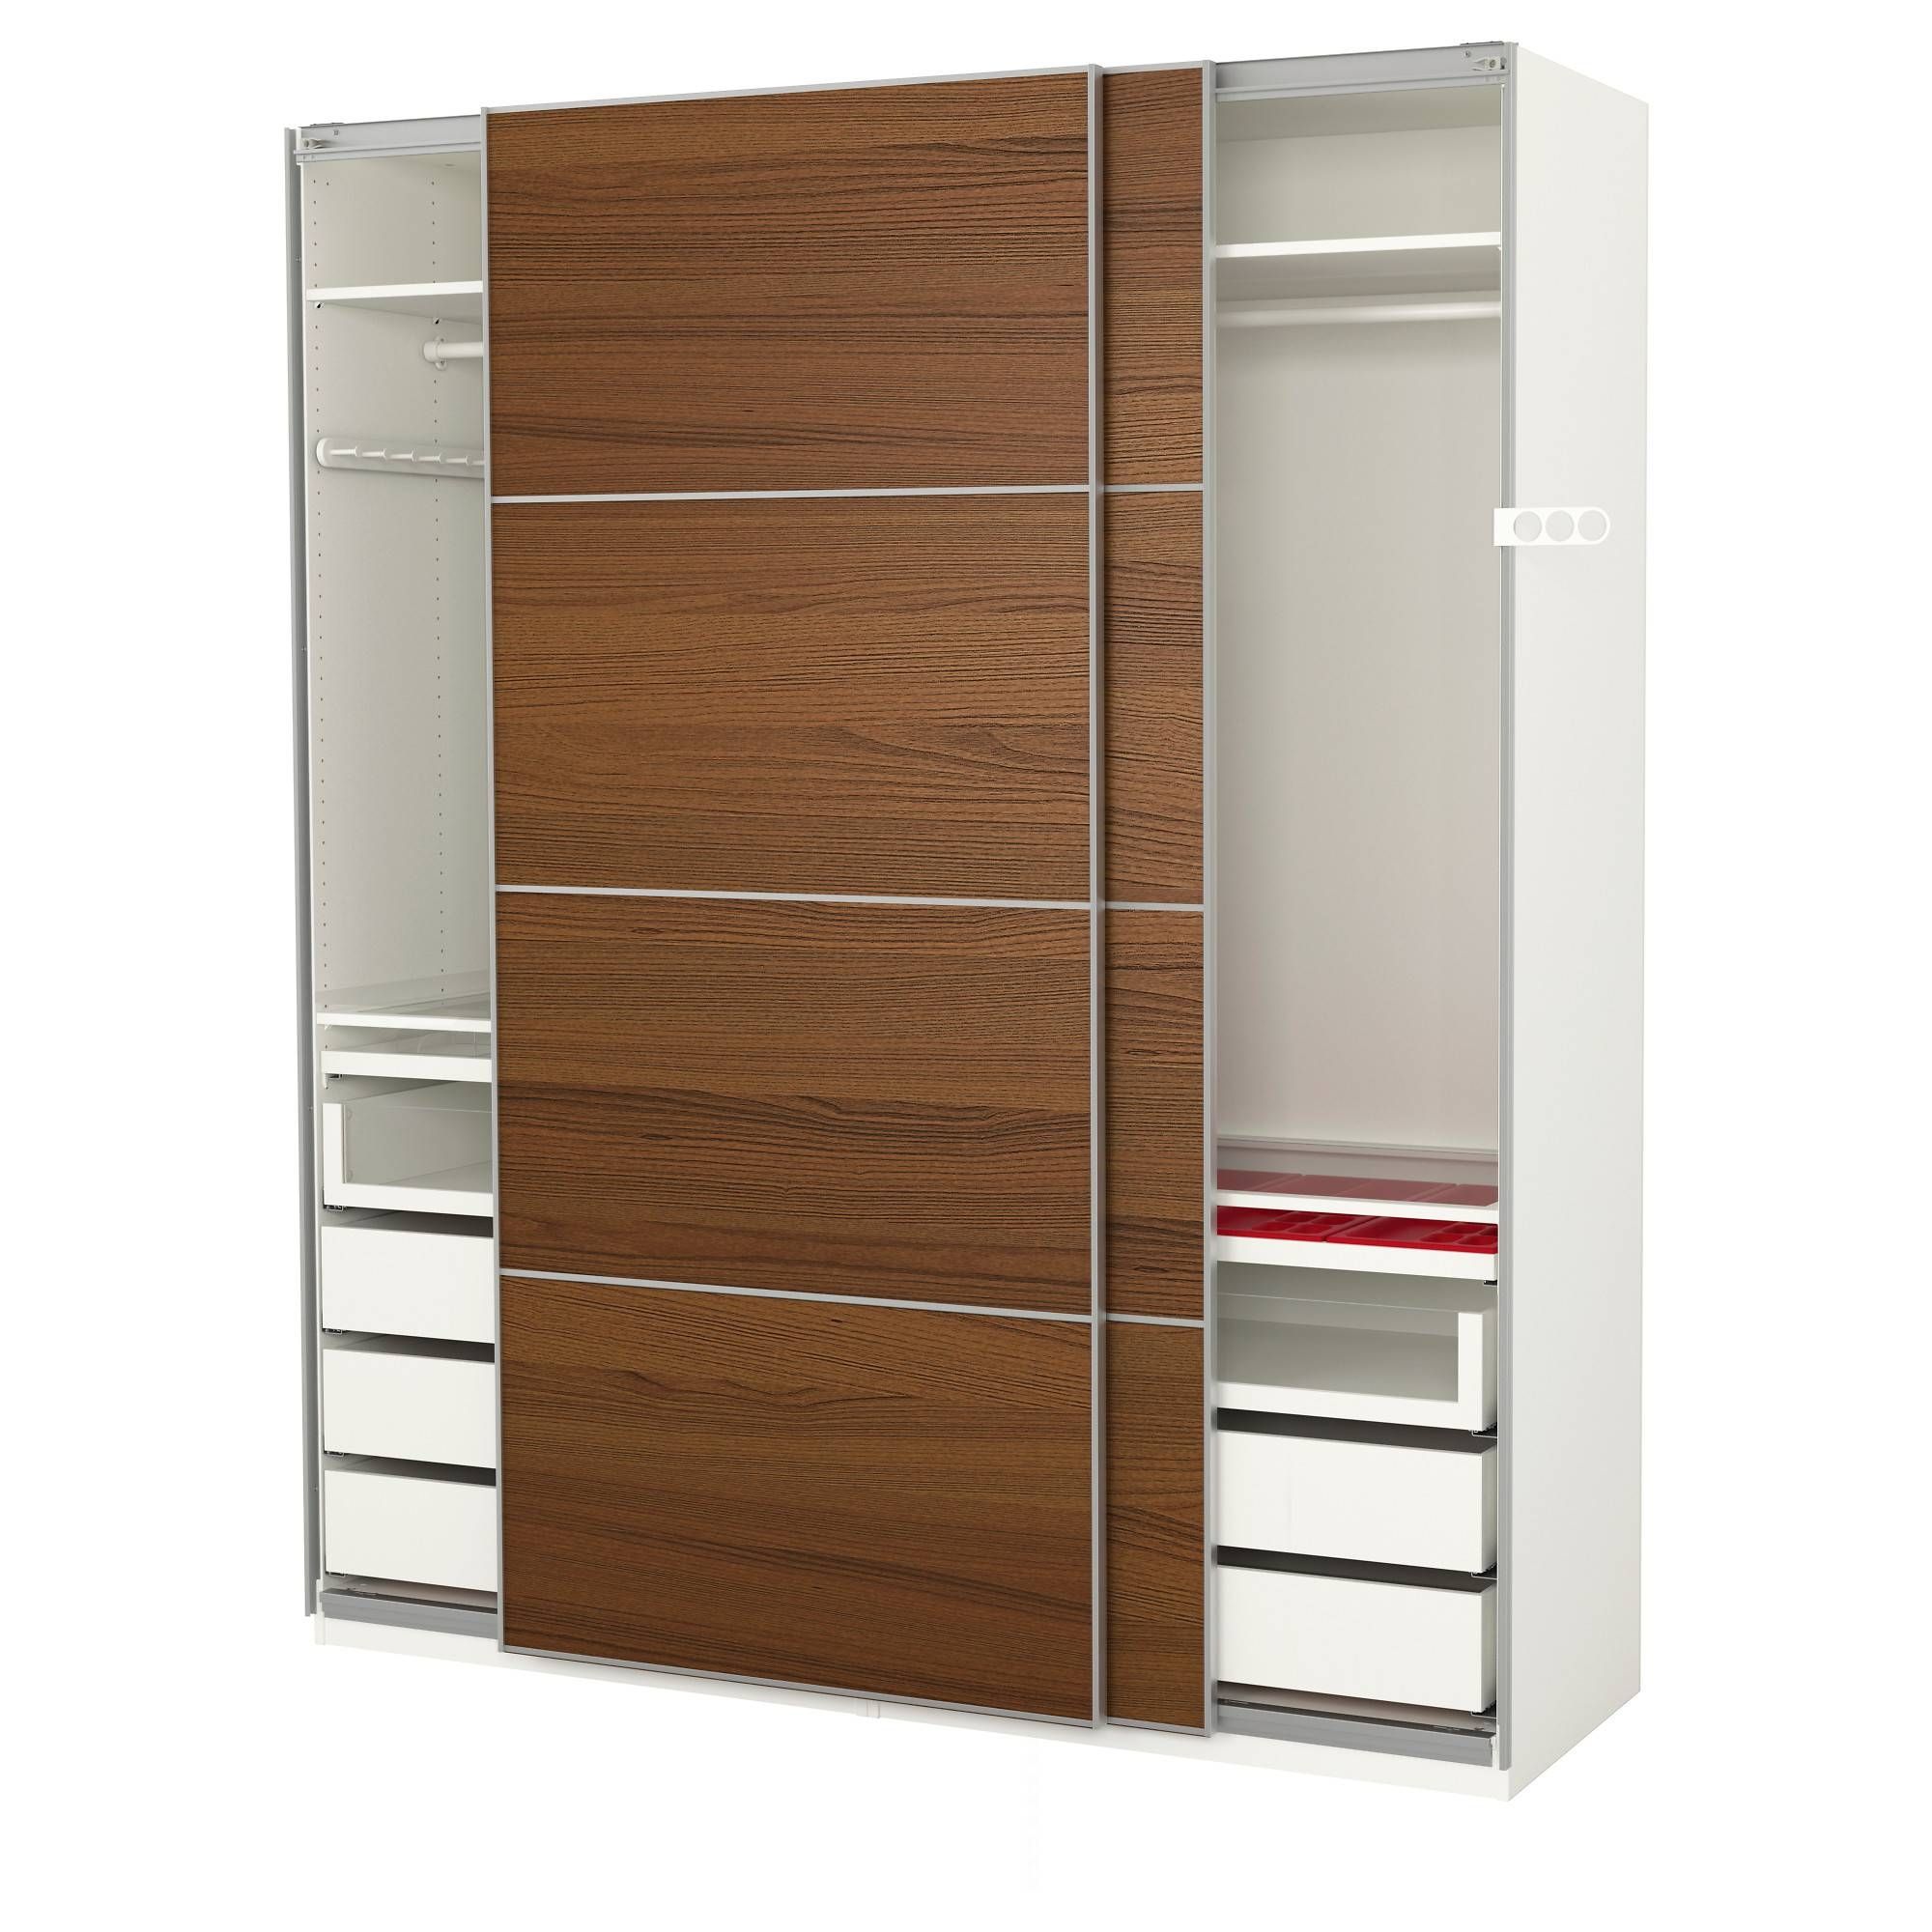 Wardrobes – Pax System – Ikea In 2 Door Wardrobe With Drawers And Shelves (View 13 of 30)